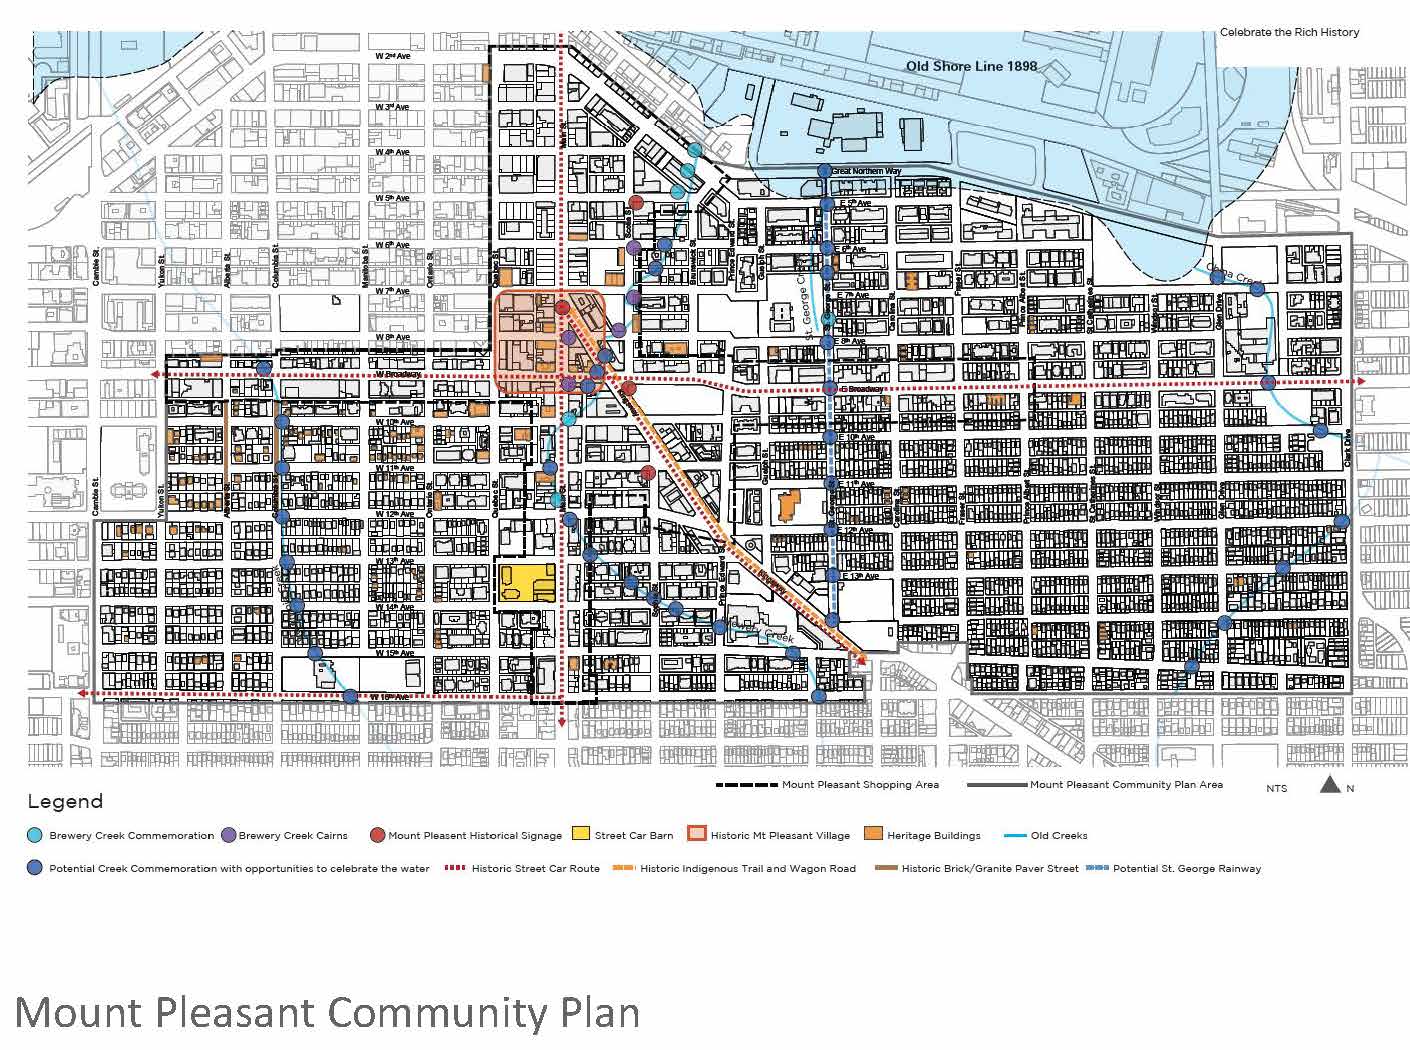  We were pleased to have the Rainway included in the Mt Pleasant Community Plan in 2013. The plan recognizes the Rainway as a potential public realm project that celebrates the historical creeks in the neighbourhood. 